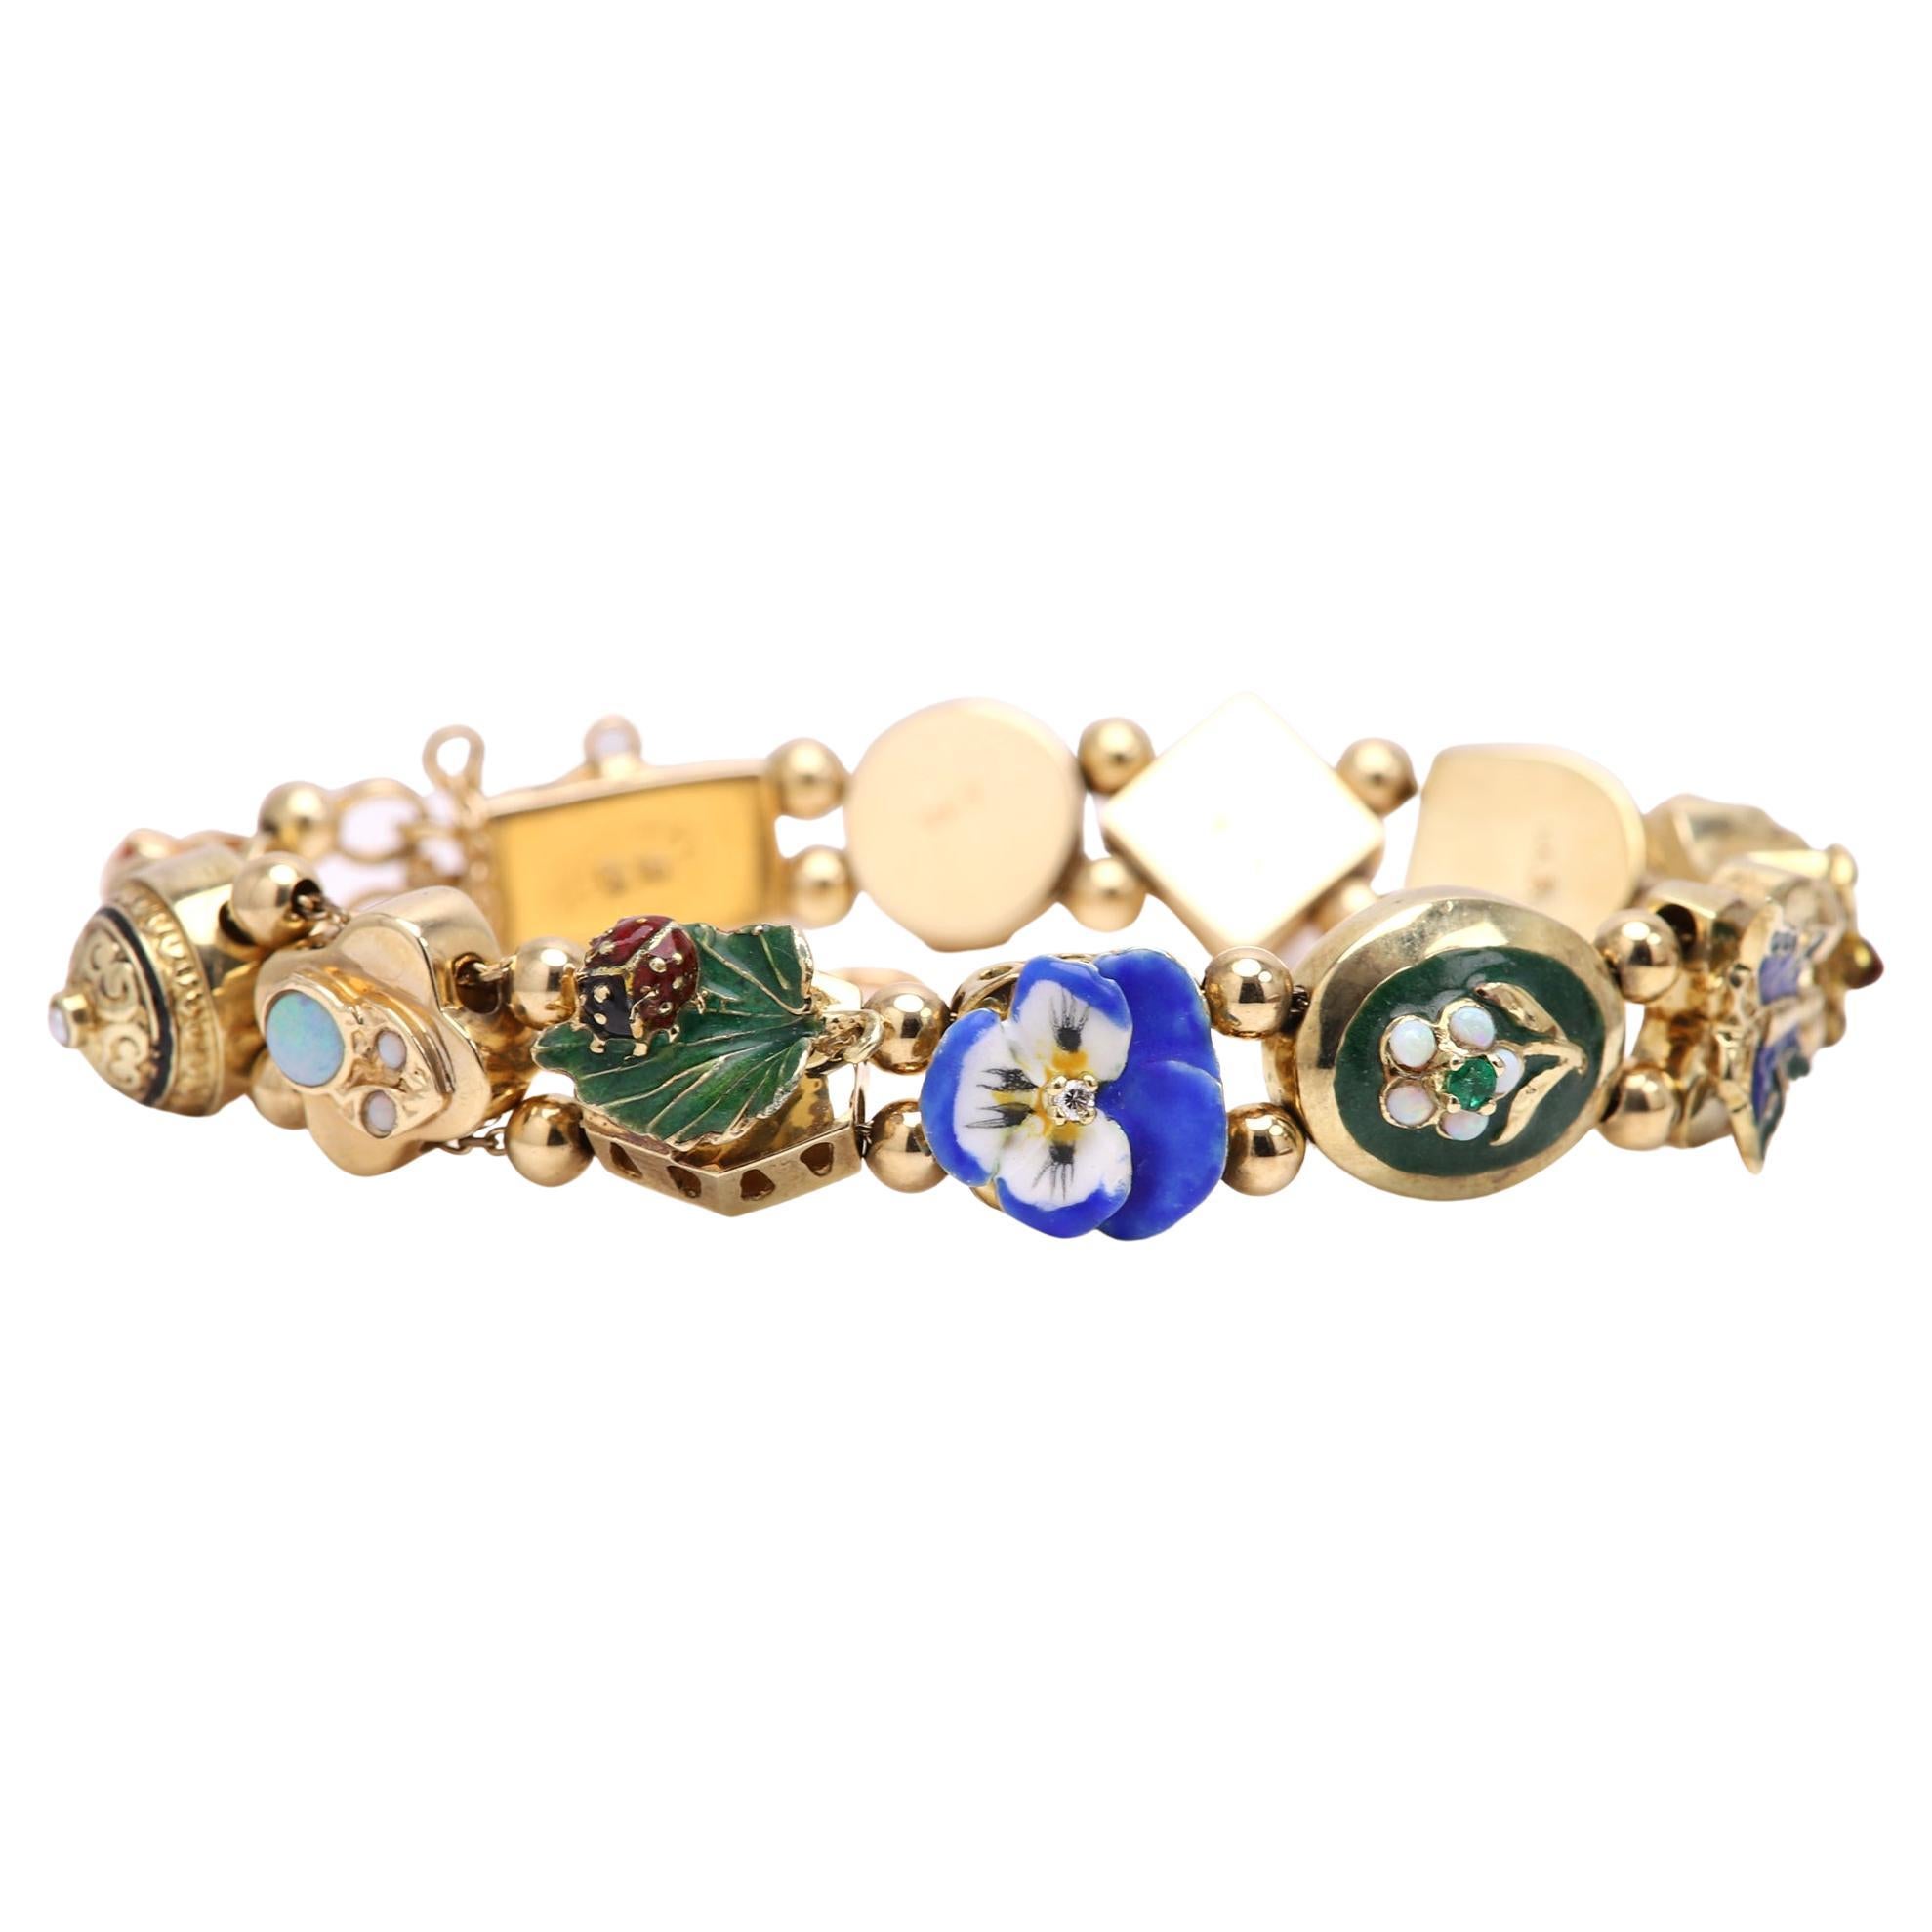 pre owned but in excellent condition retro vintage slide bracelet
14k yellow gold total 35 grams
12 slides total length 7' inches
circa 1940
slides include am emerald and topaz stone and serval enamel pieces.
every slide is stamped 14k
extra